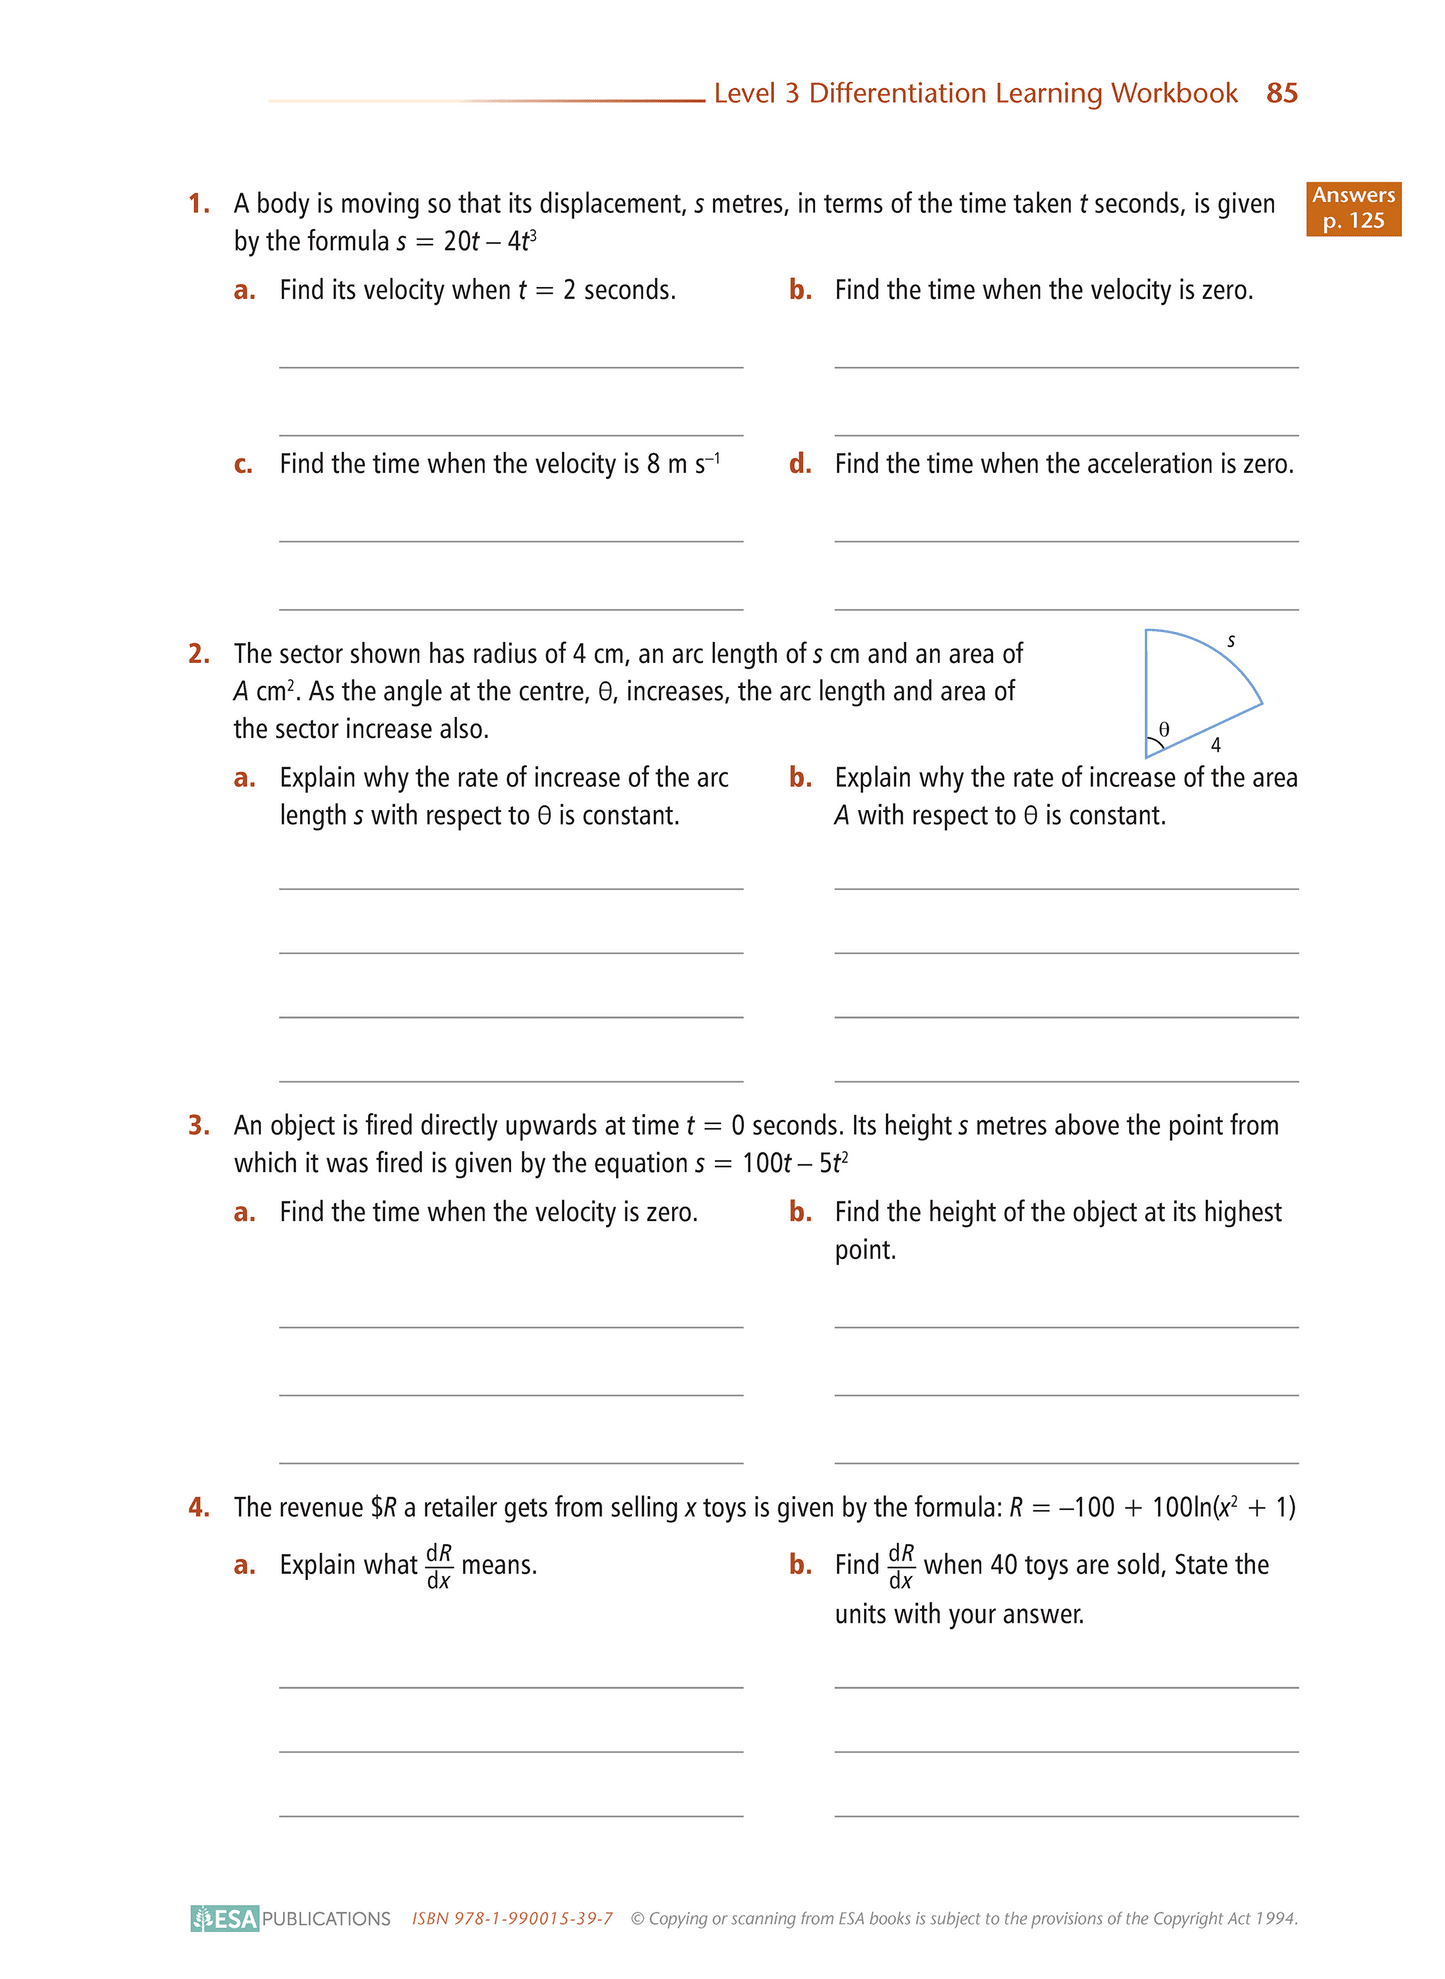 Level 3 Differentiation 3.6 Learning Workbook